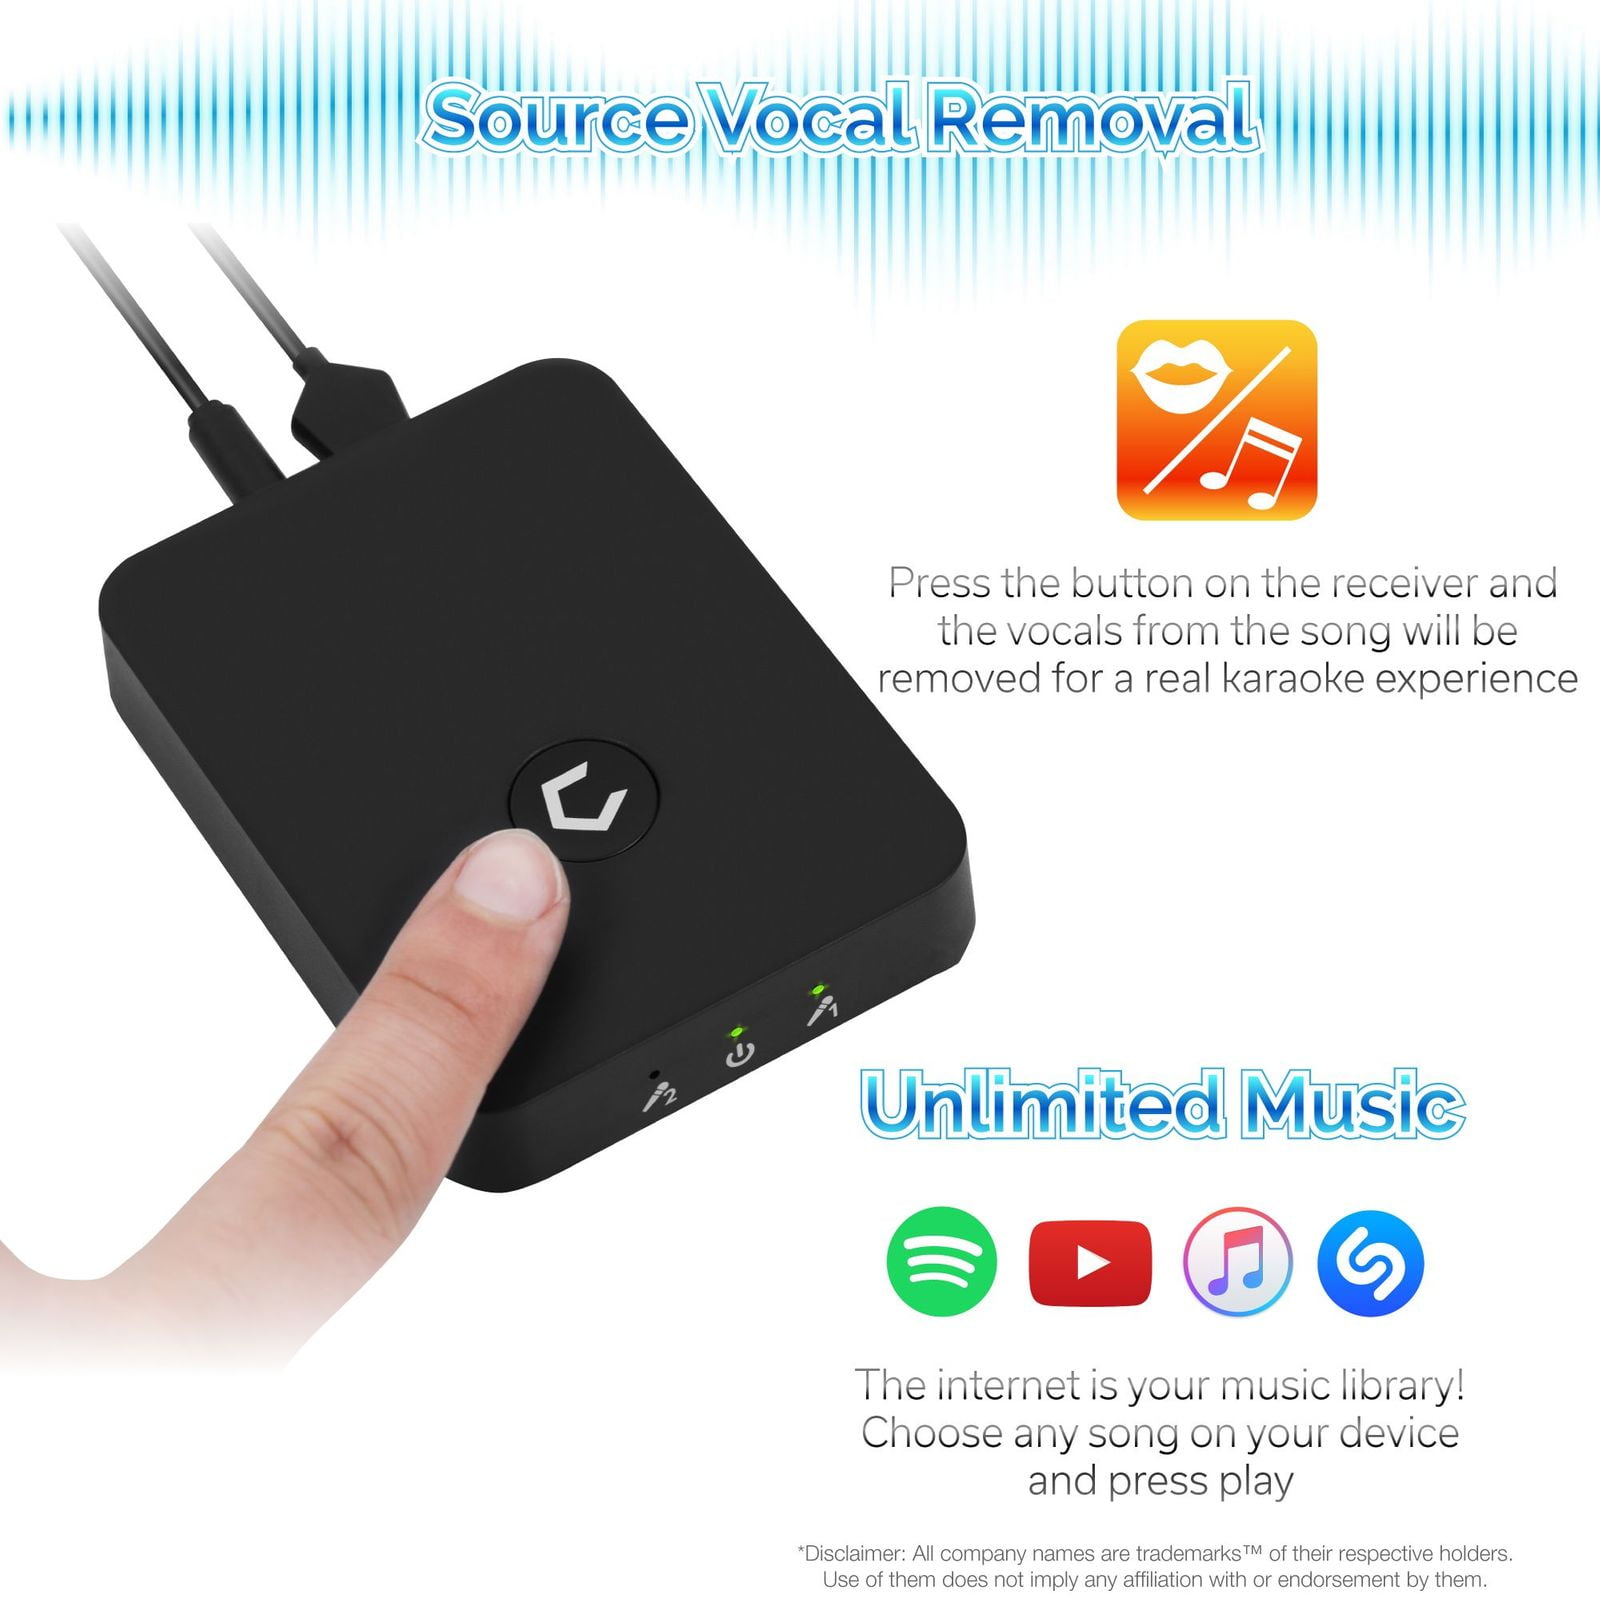 New Model BT Speaker Karaoke Machine Choose Unlimited Music Source from YouTube for iPhone iPad Smartphone Tablet Cobble Pro Wireless Karaoke Microphone 2-pack Mic Source Vocal Removal Technology